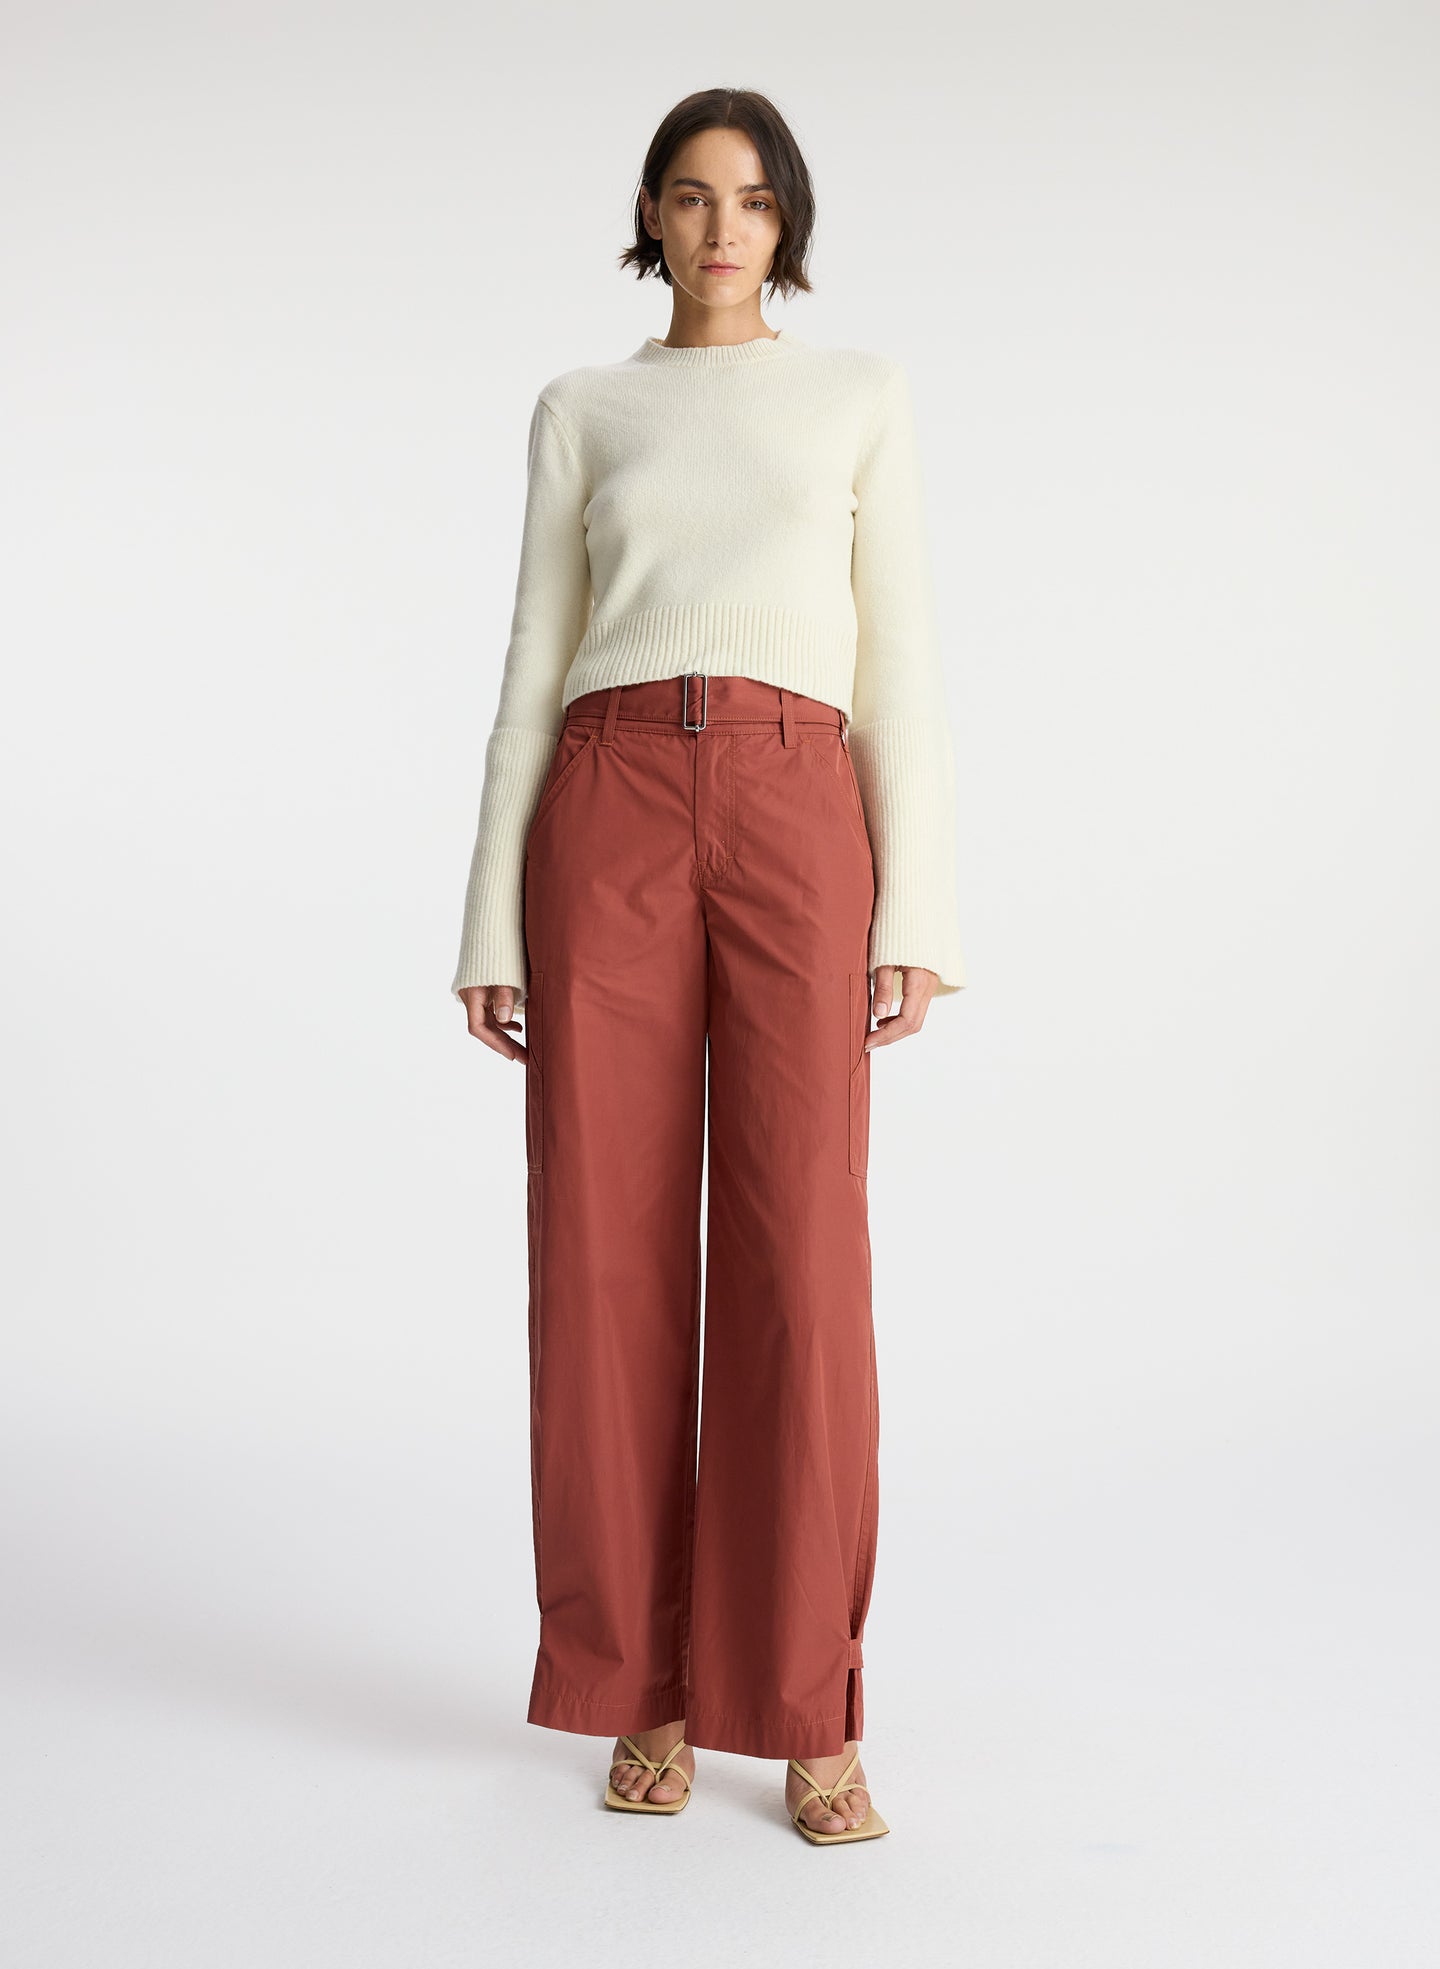 front view of a woman wearing a cream sweater and brown pants